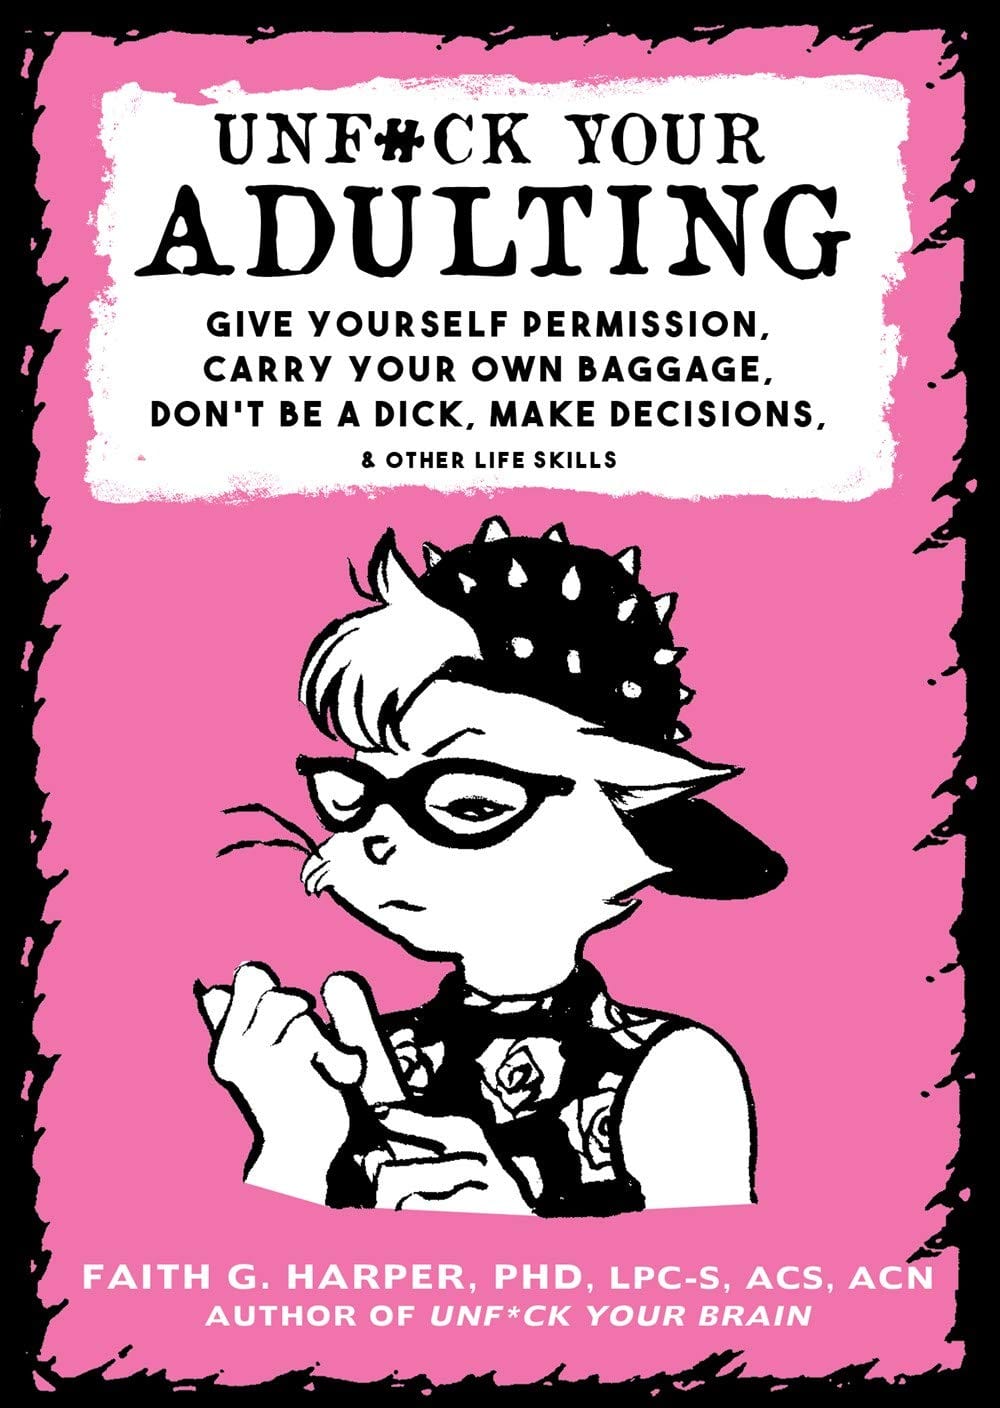 Unf#ck Your Adulting - Third Eye